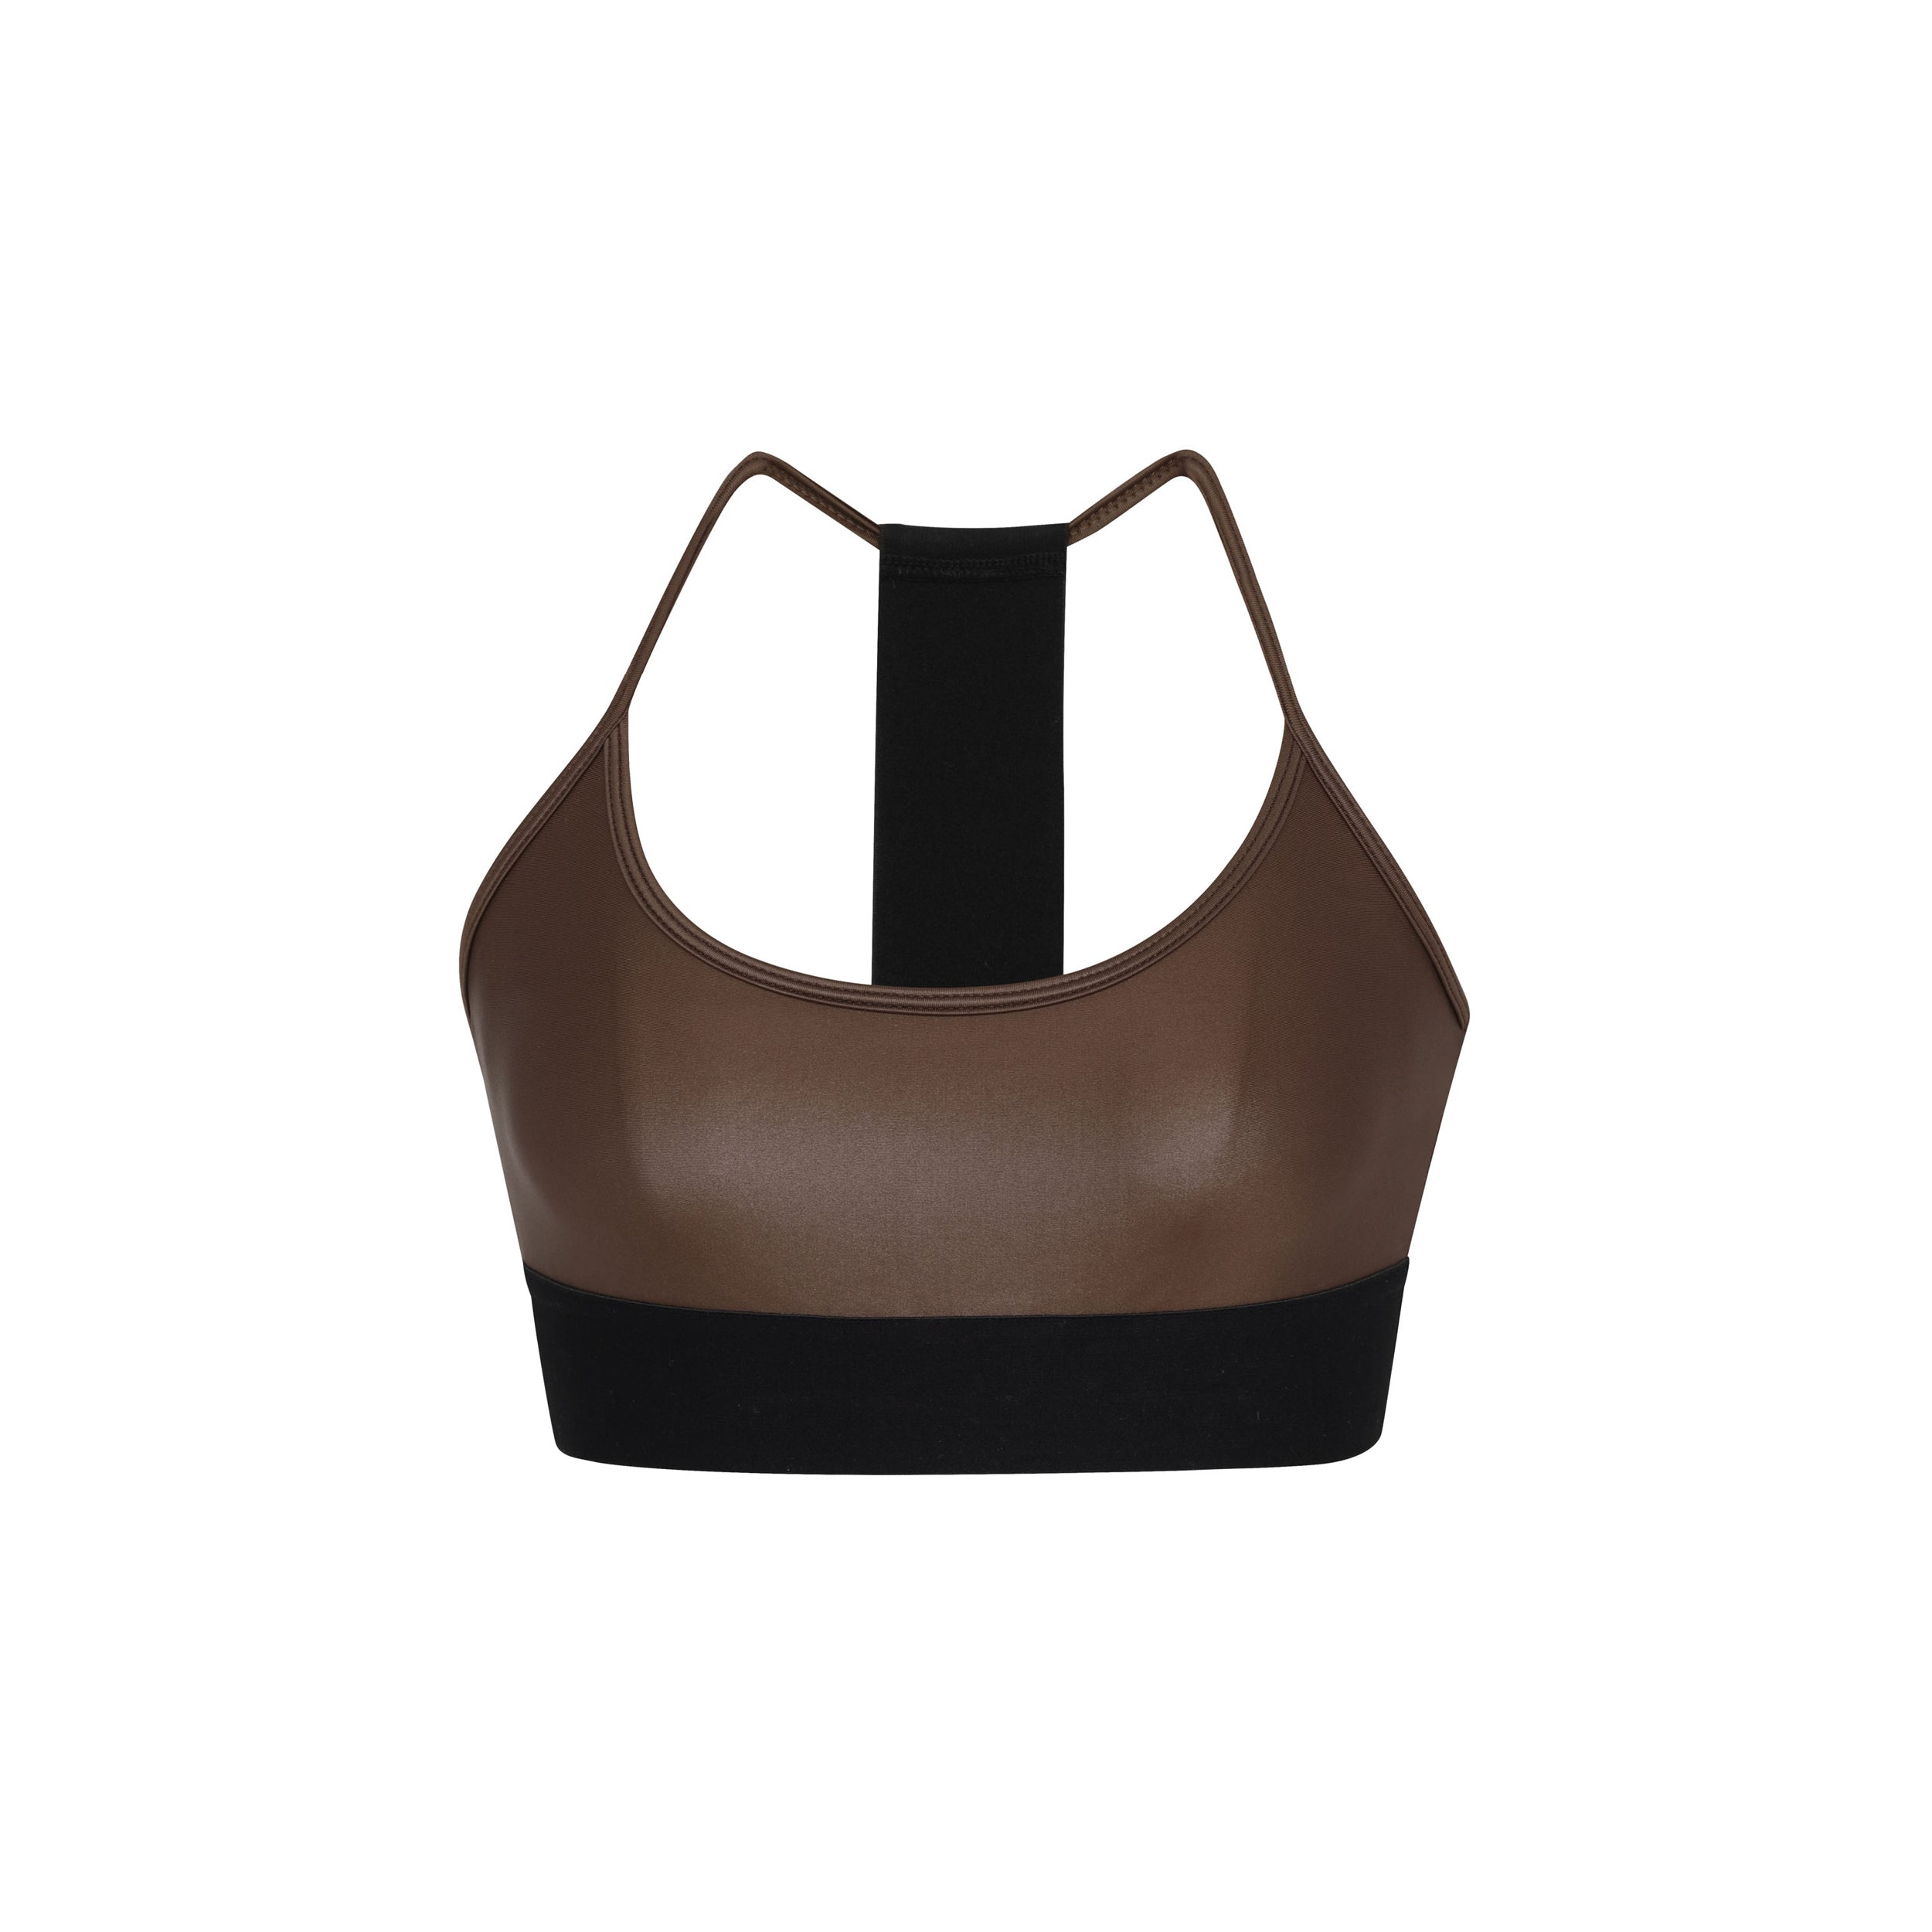 Product shot of brown sports bra featuring a scoop neckline with a supportive elastic band